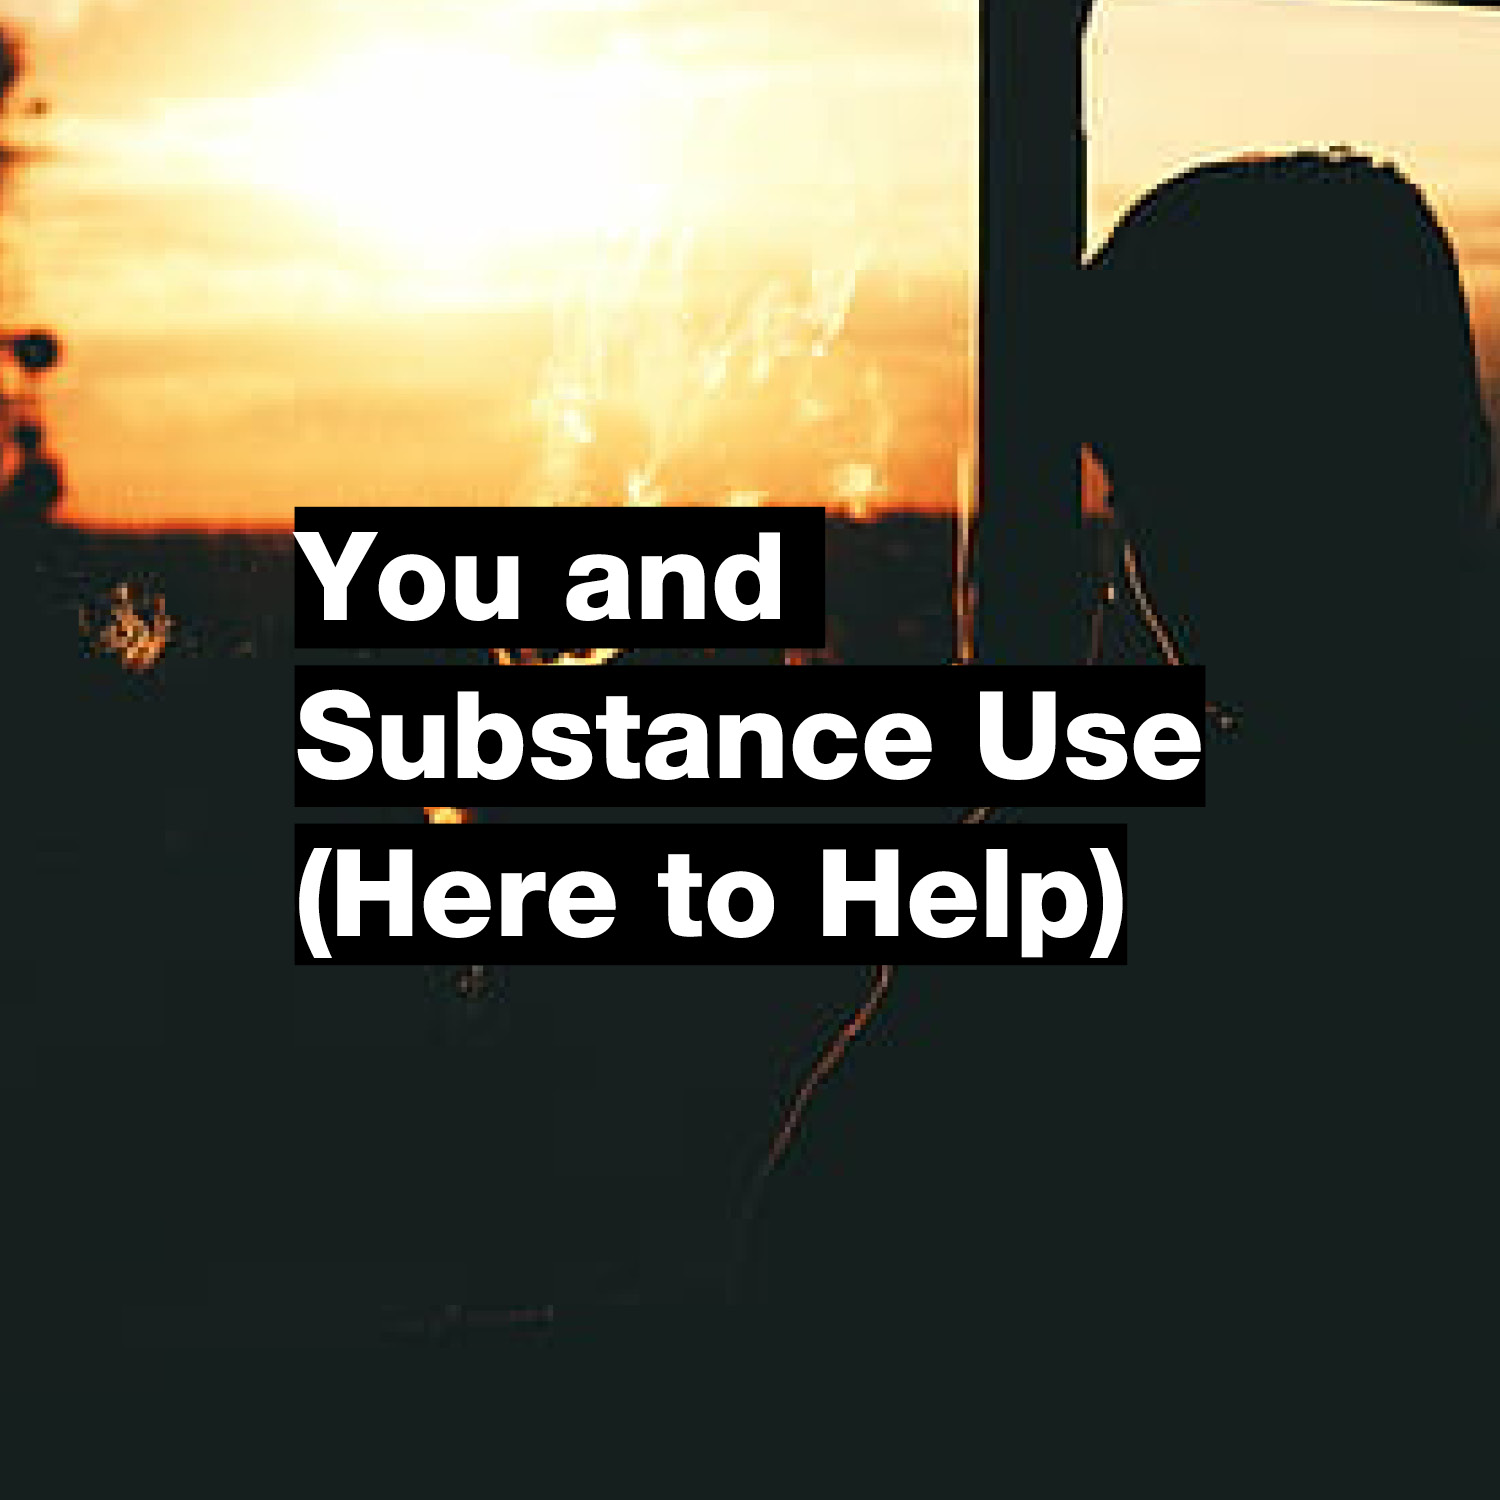 You and Substance Use (Here to Help)